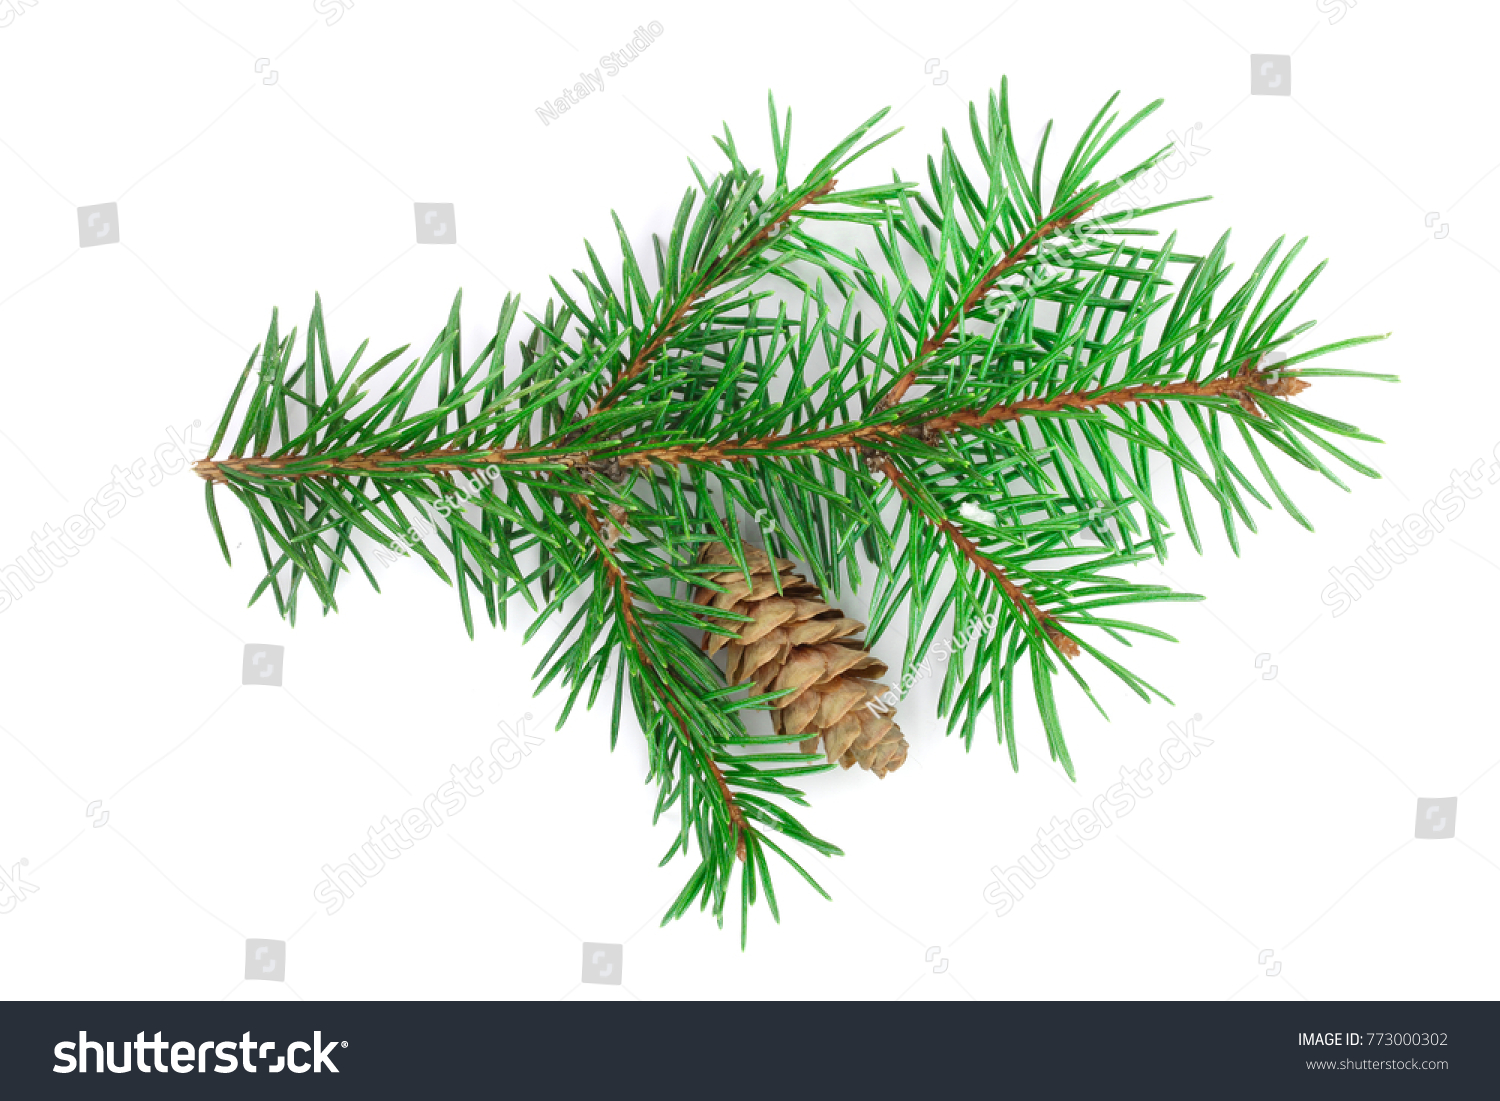 Fir tree branch with cone isolated on a white background close-up. Top view #773000302